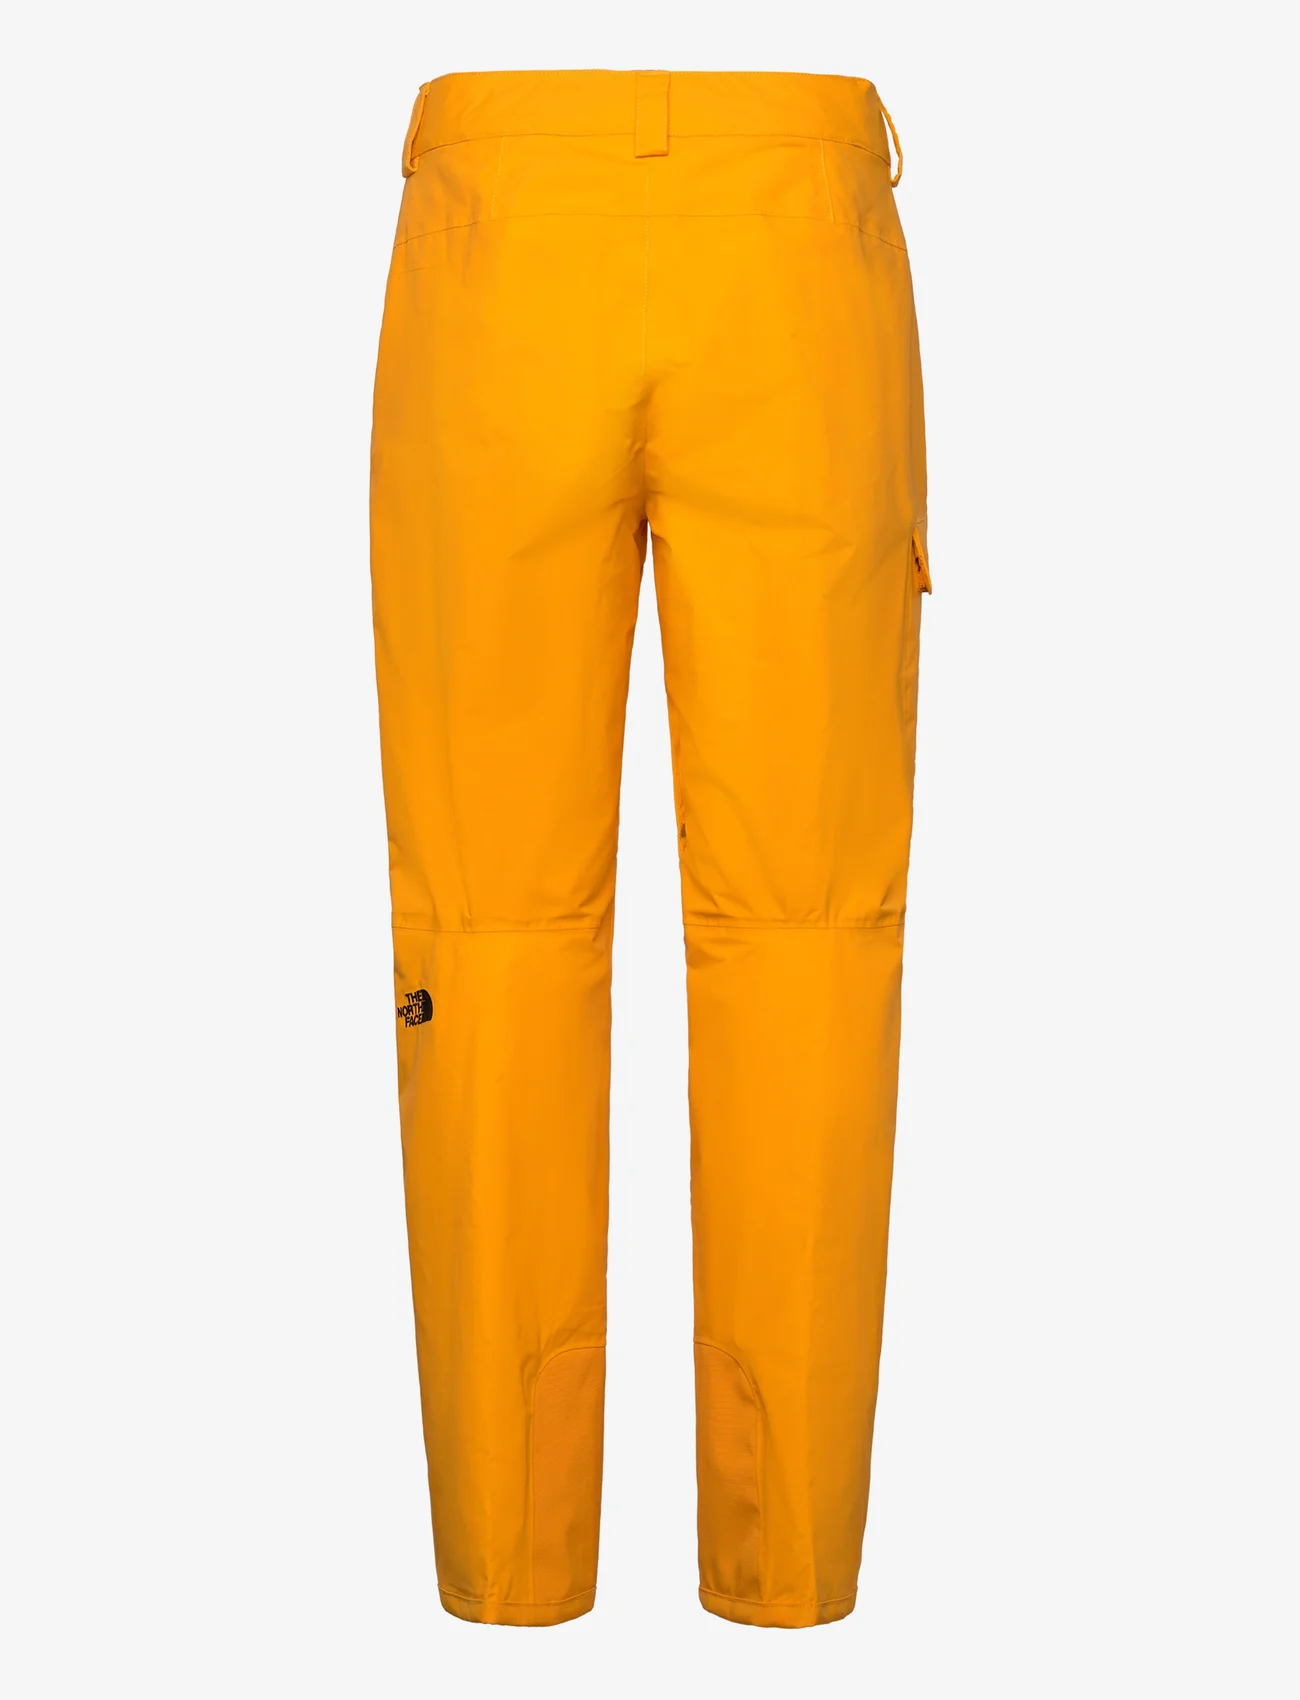 The North Face - M FREEDOM PANT - skibroeken - summit gold - 1